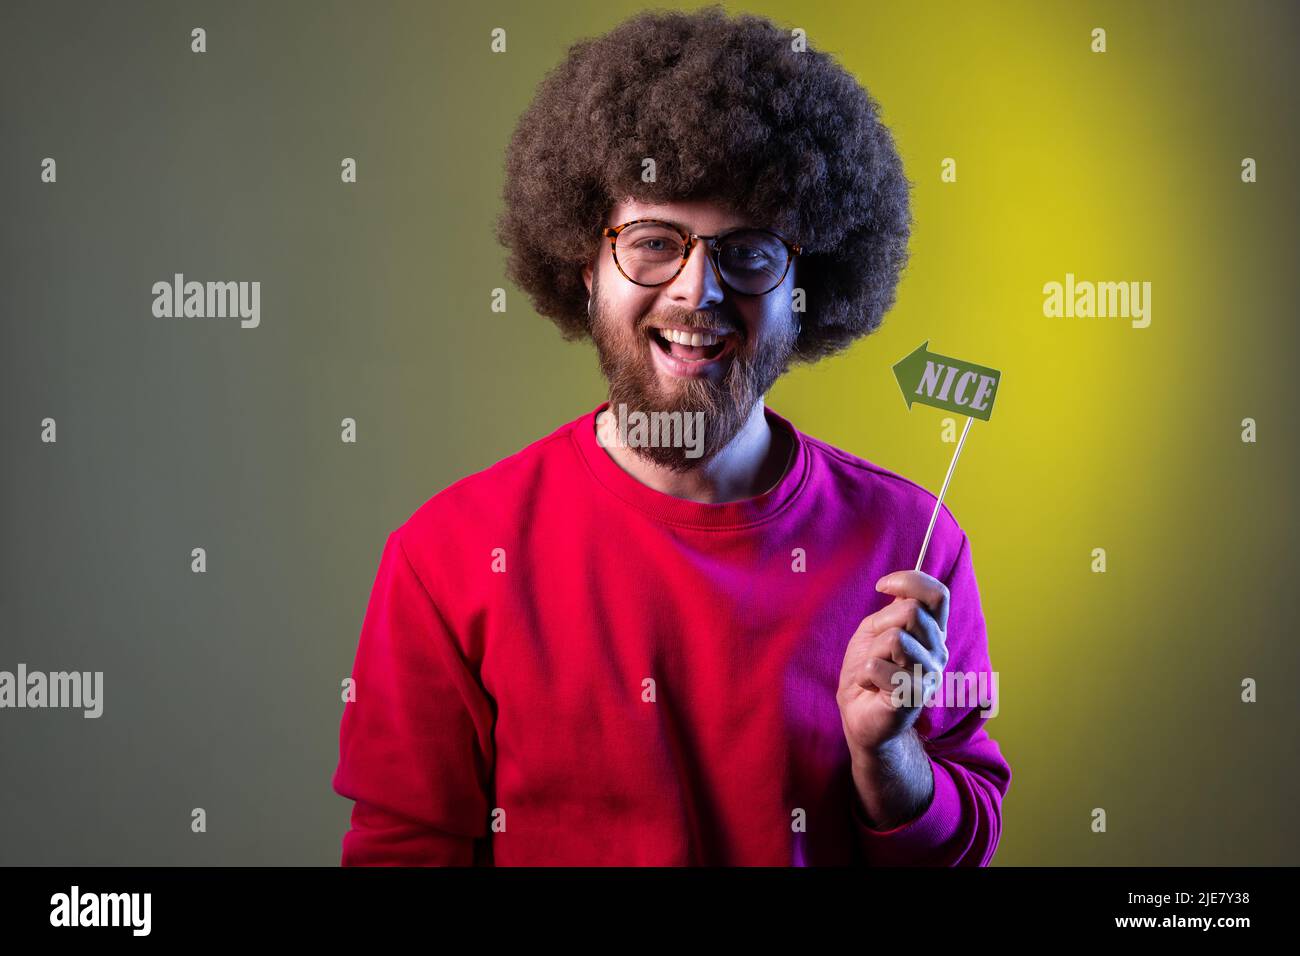 Happy positive hipster man with Afro hairstyle having event, holding party props with nice word in hands, wearing red sweatshirt. Indoor studio shot isolated on colorful neon light background. Stock Photo